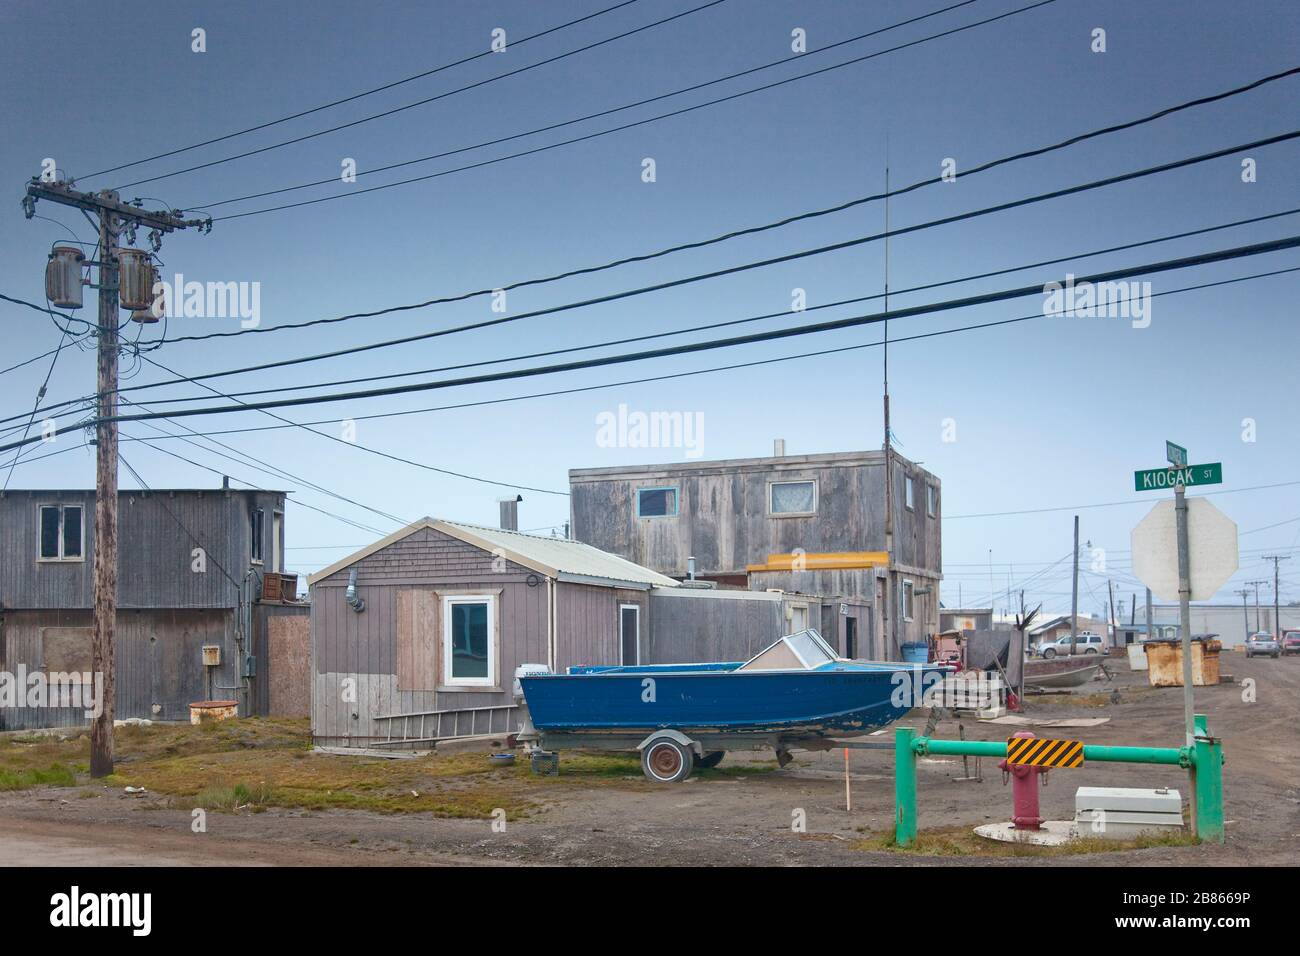 Inuit village with a blue boat and a lamp post at the forefront, Barrow, Alaska Stock Photo